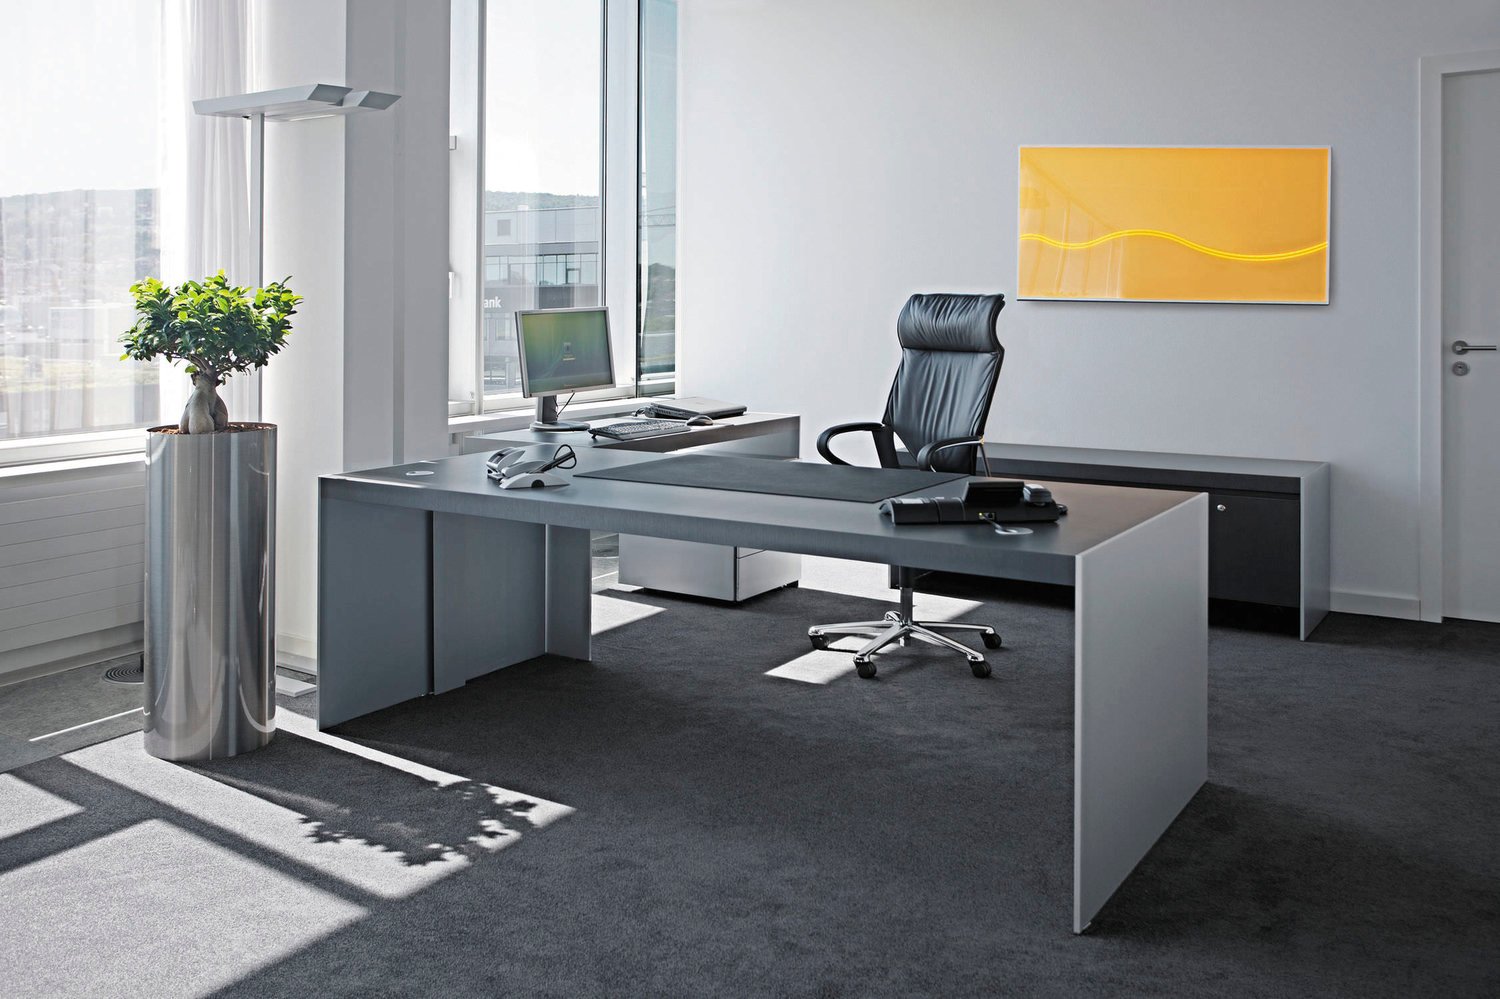 Professional Office Cleaning Service Invigorate Your Office To Attract More Clientele In 2020